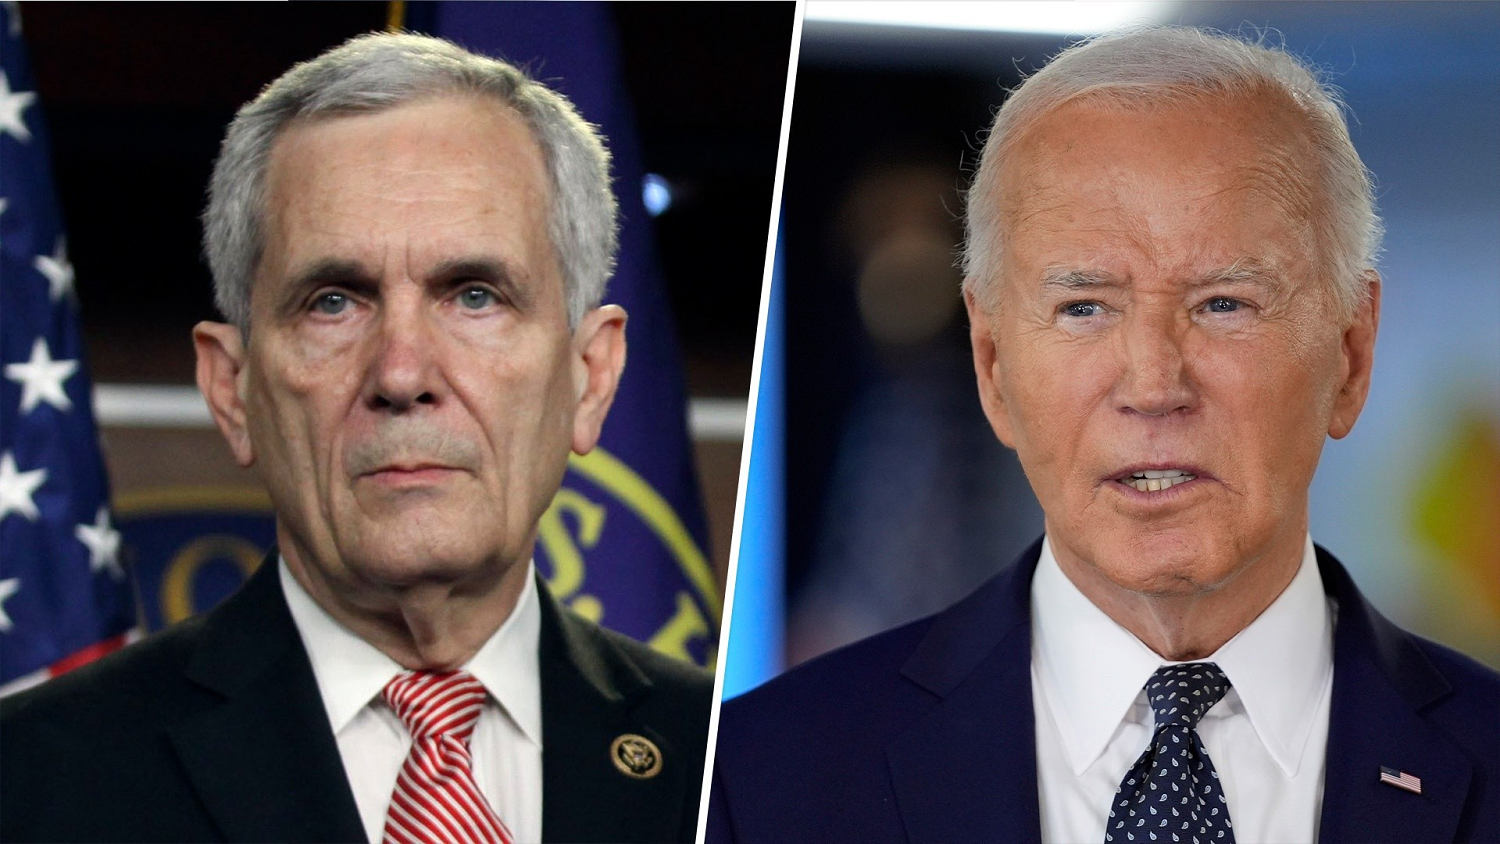 Rep. Doggett becomes first Democrat to call on Biden to leave race